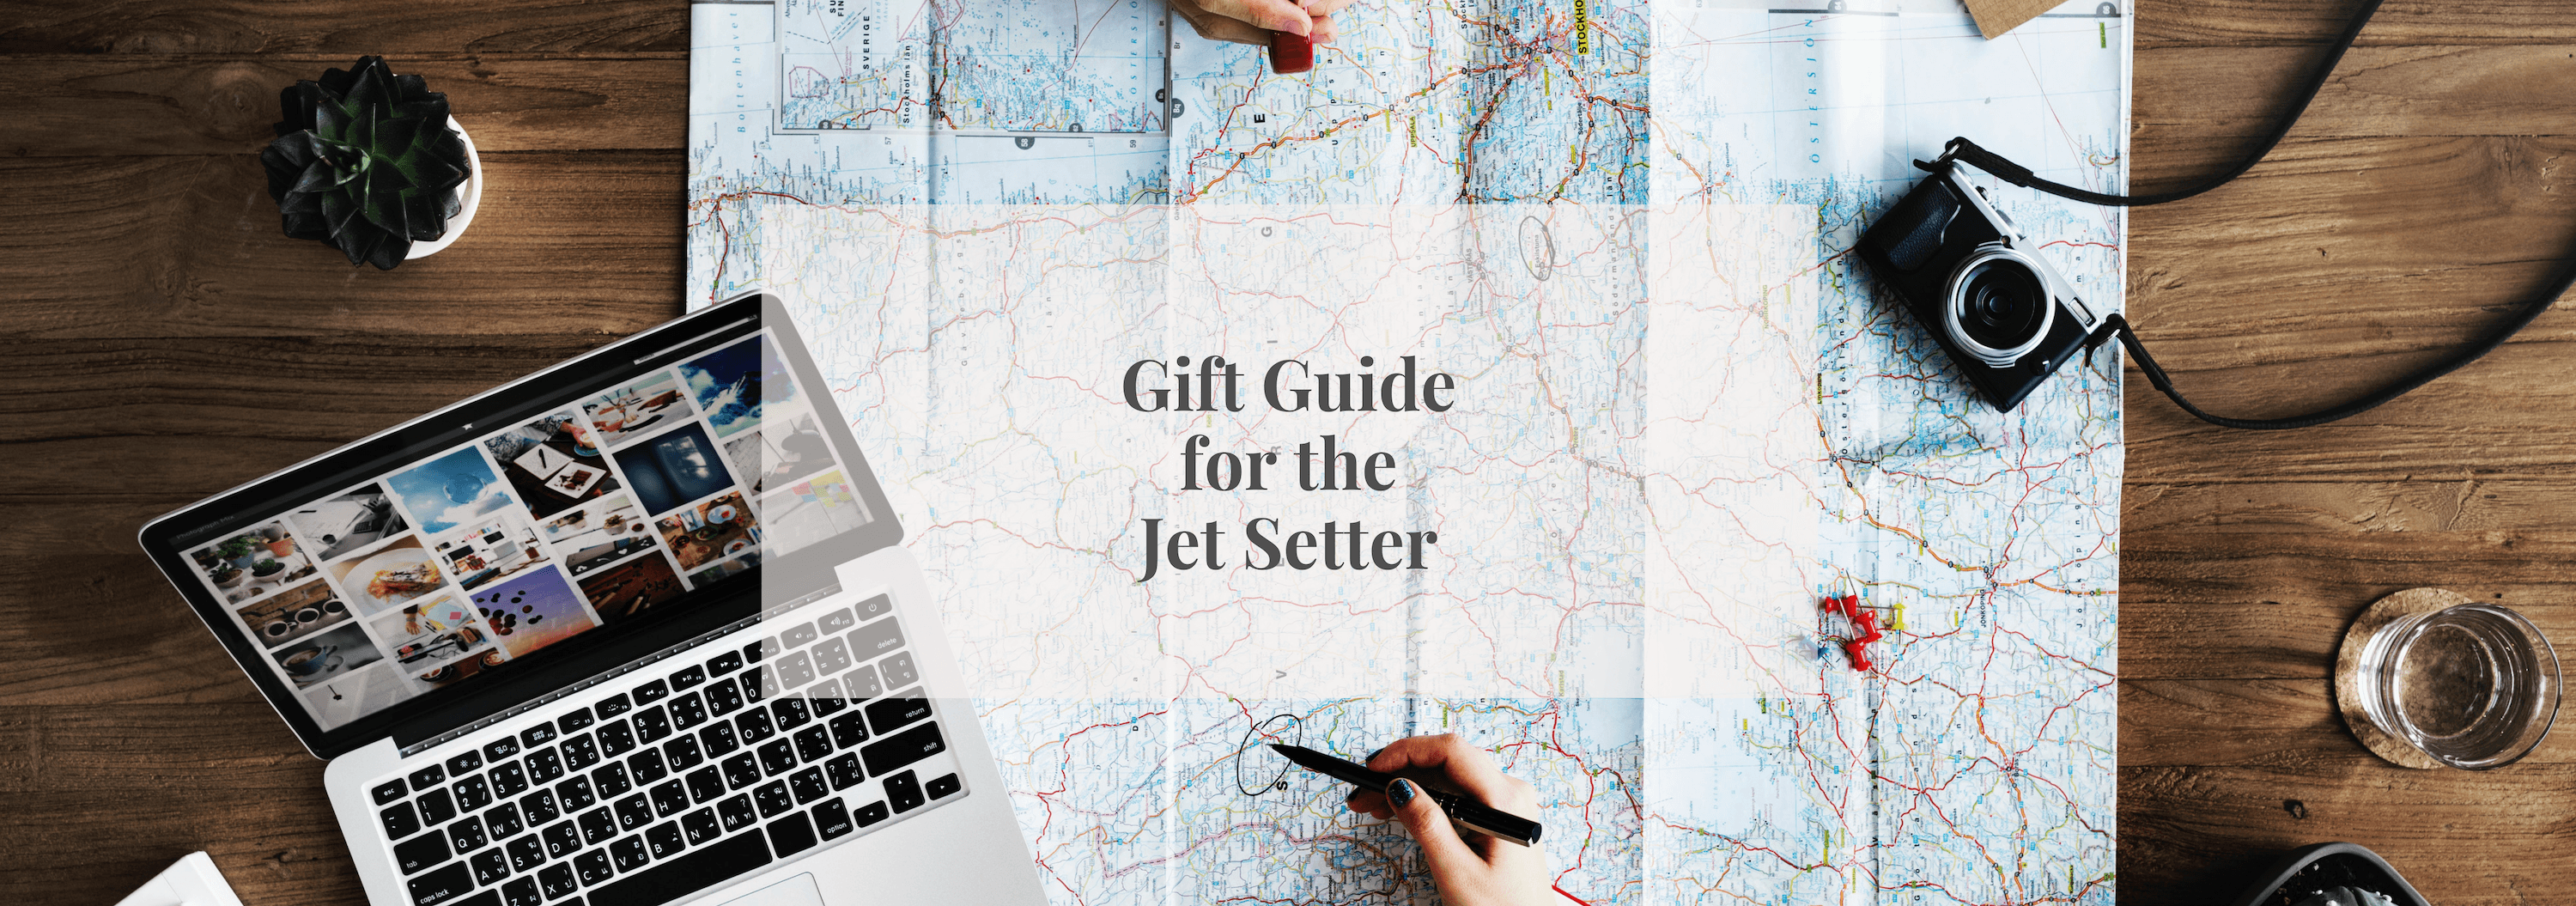 Gift Guide for the Jet Setter - Numi